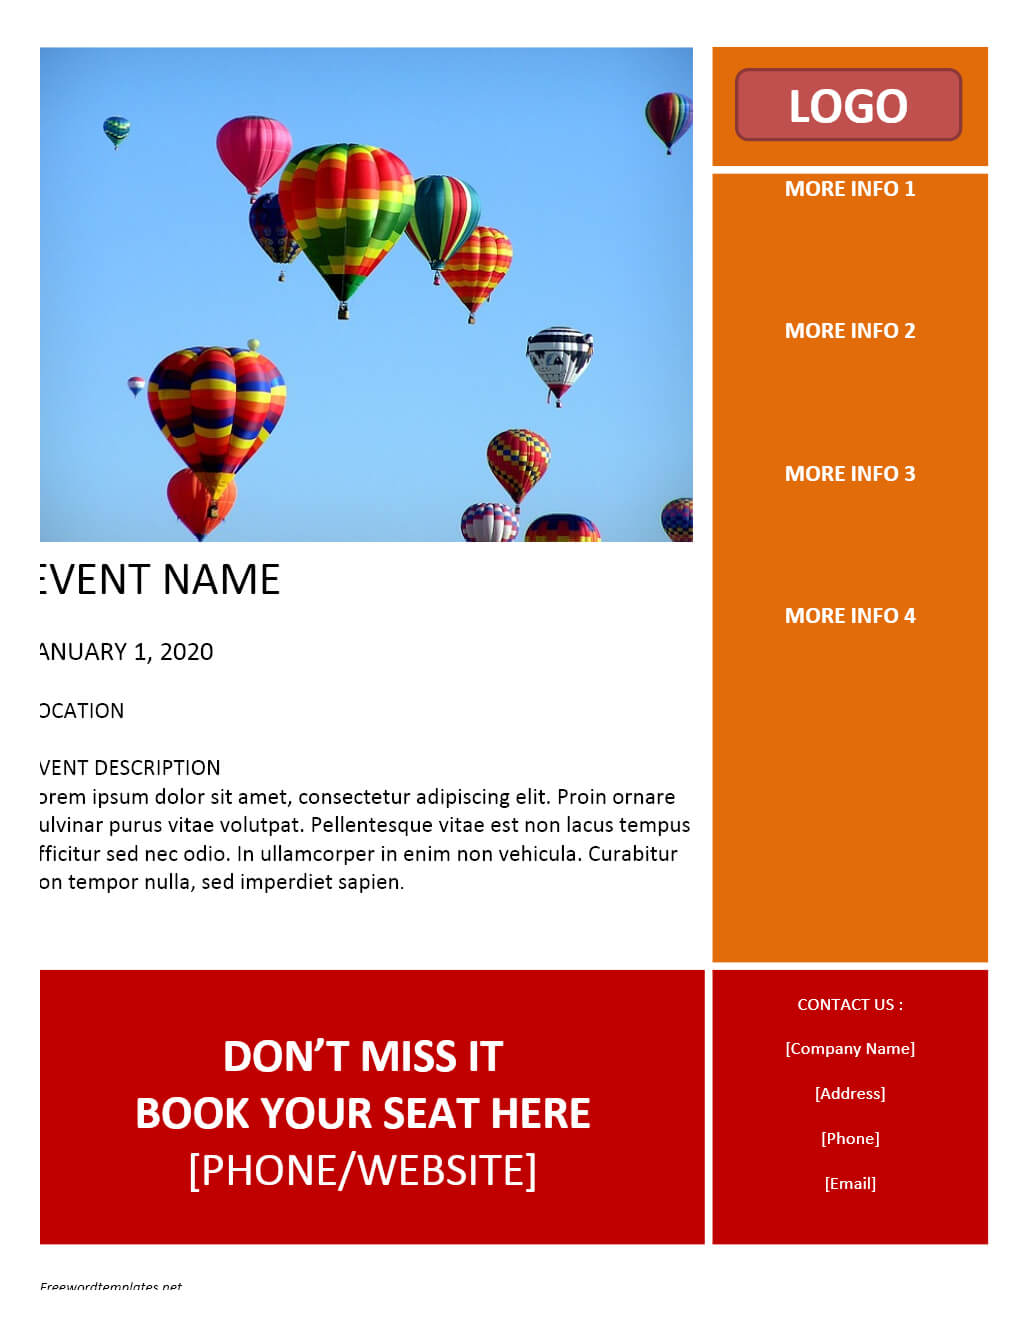 Event Flyer Template Word Archives | Freewordtemplates Regarding Templates For Flyers In Word